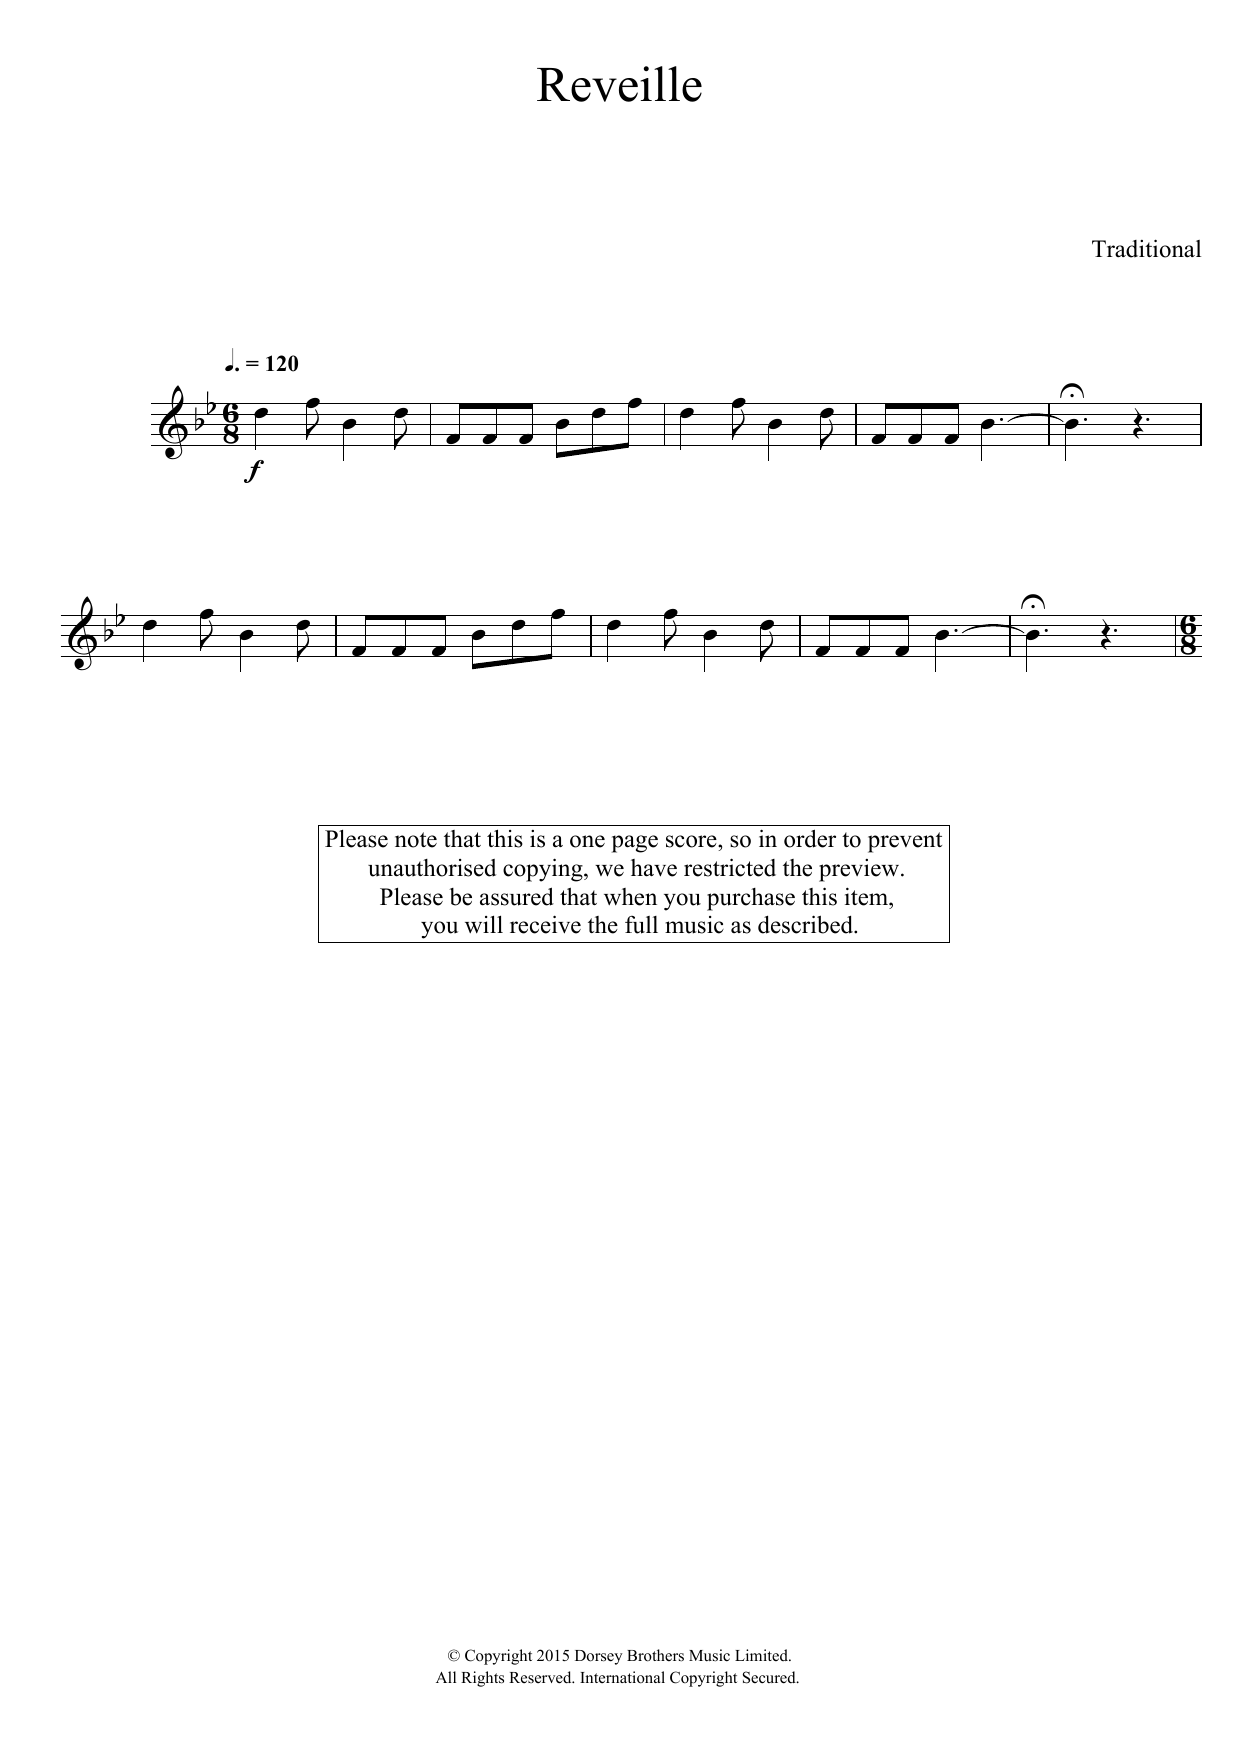 Download Traditional Reveille Sheet Music